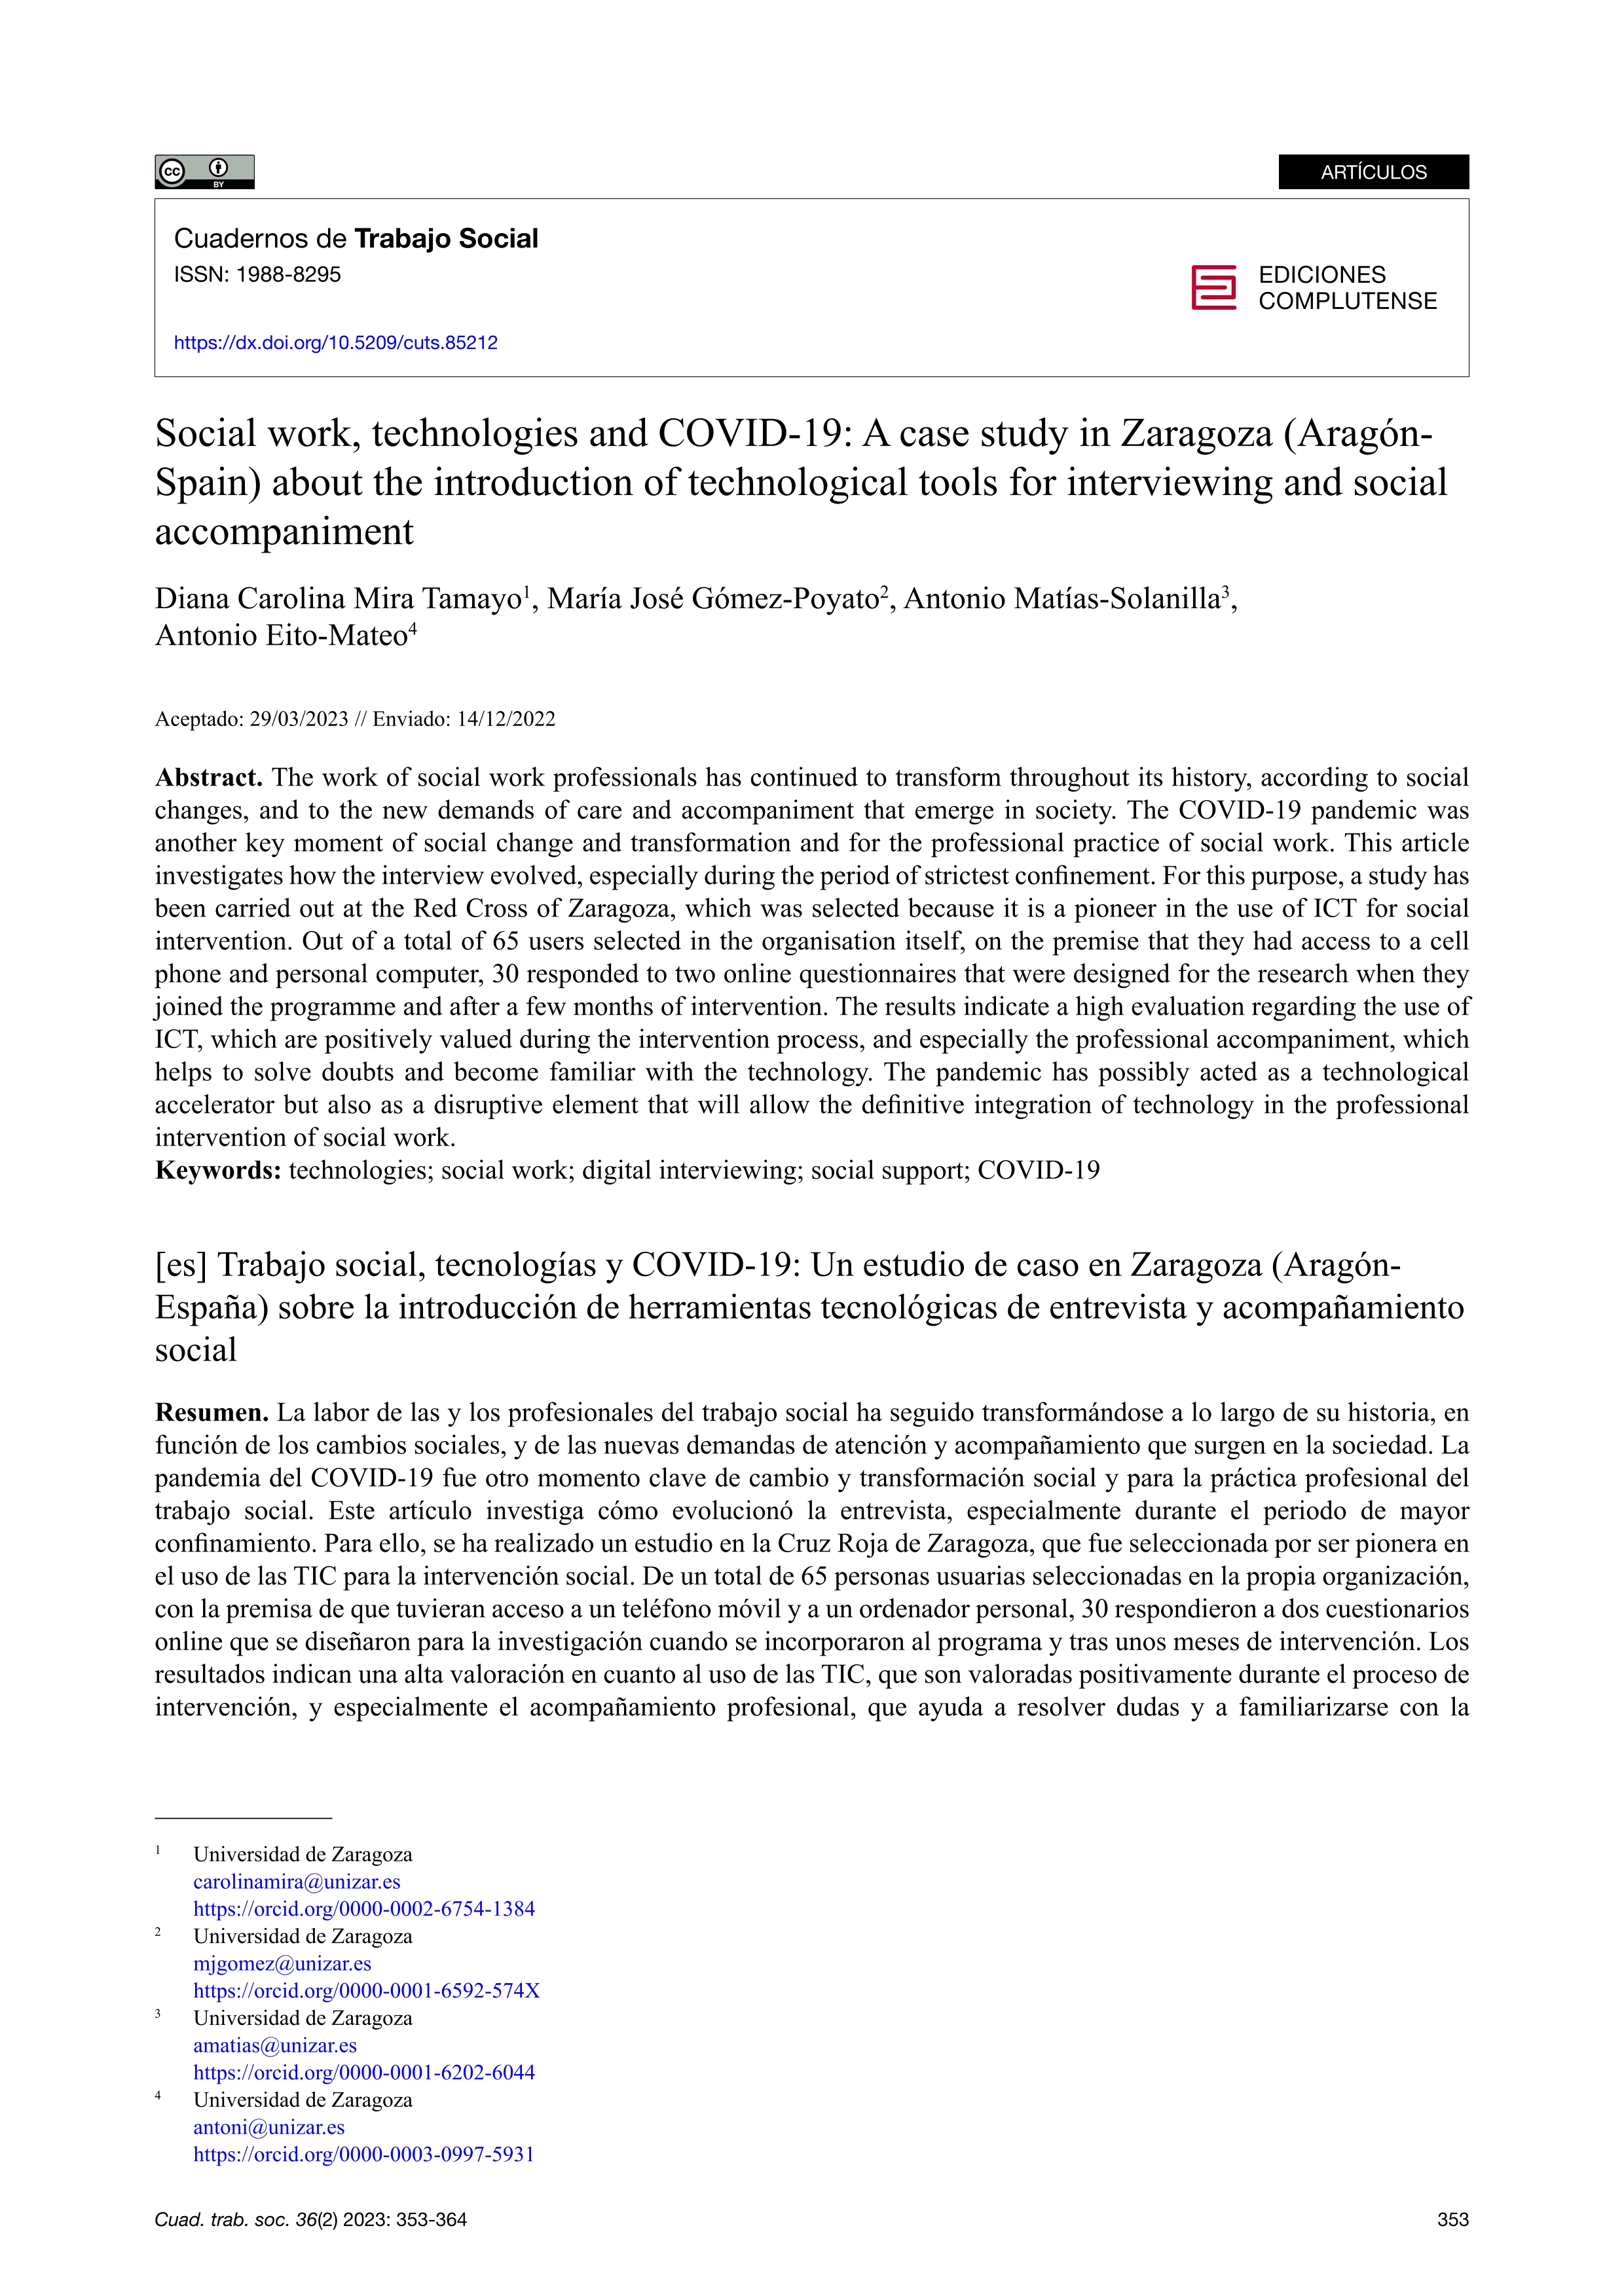 Social work, technologies and covid 19: a case study in Zaragoza (Aragón-Spain) about the introduction of technological tools for interviewing and social accompaniment.